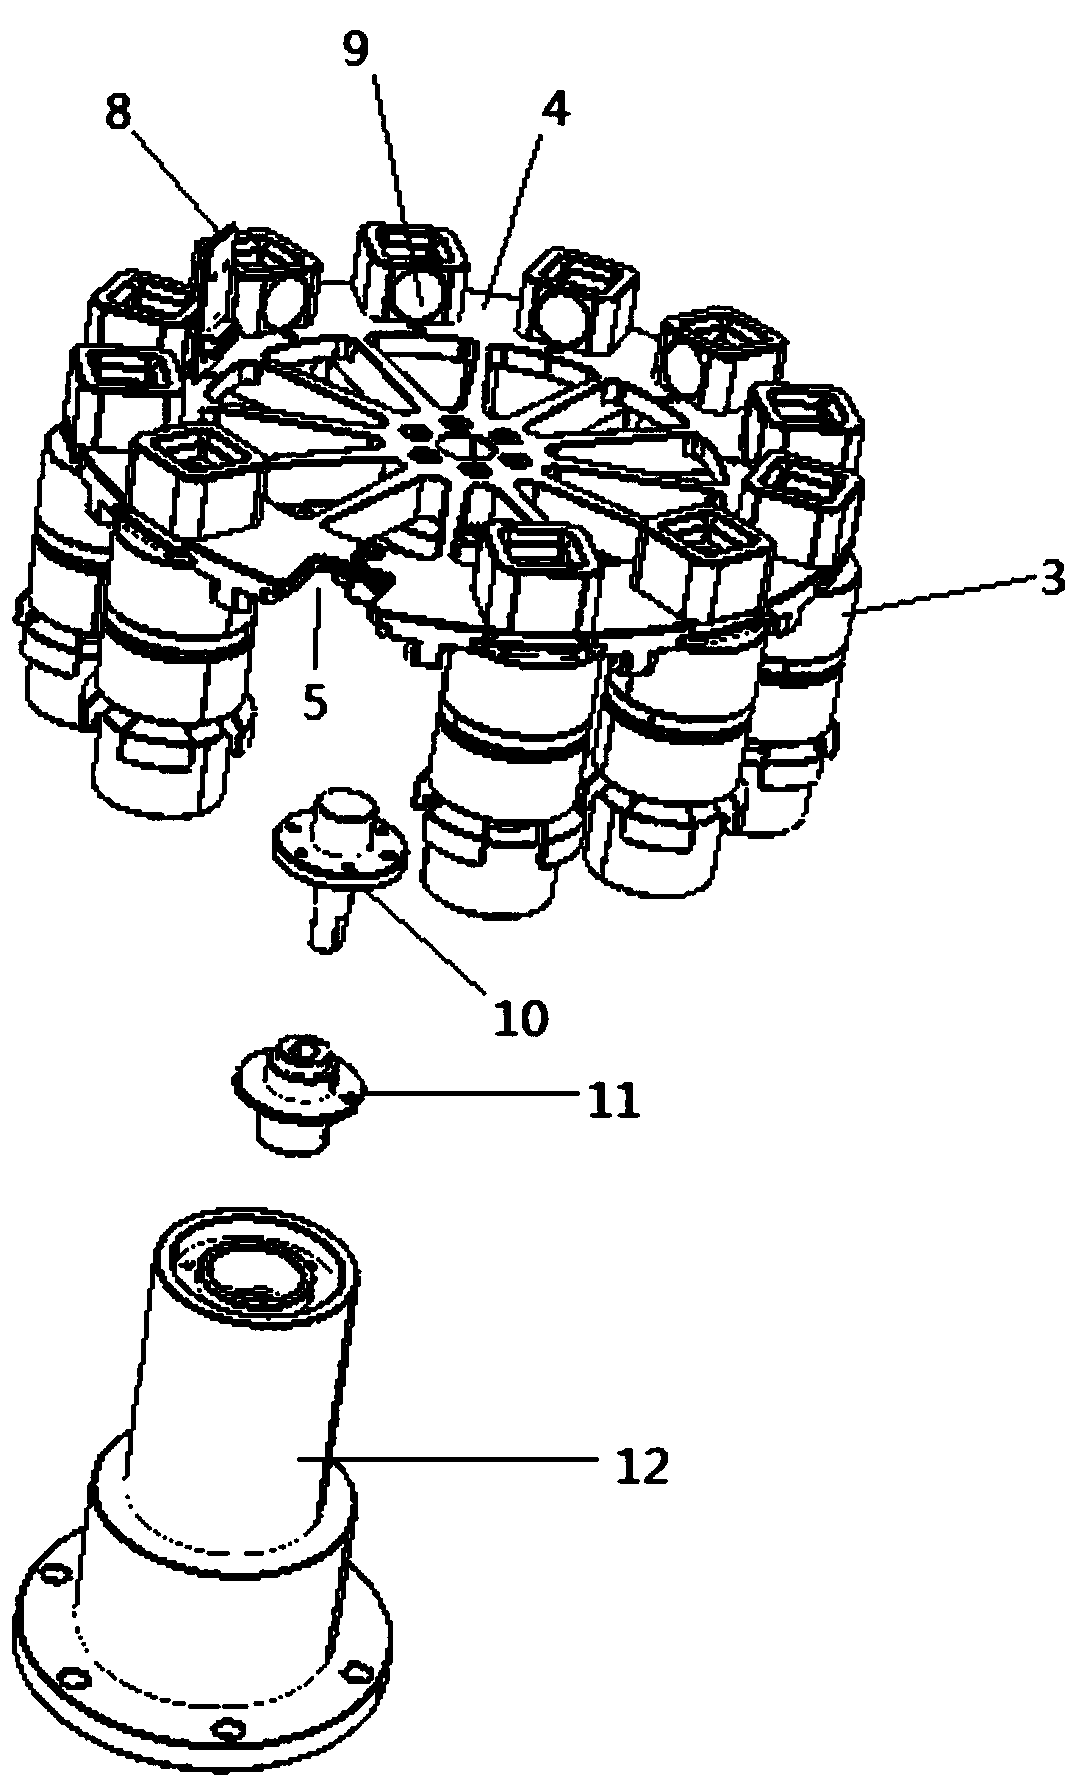 Seal conveying and taking structure of seal controller and seal controller